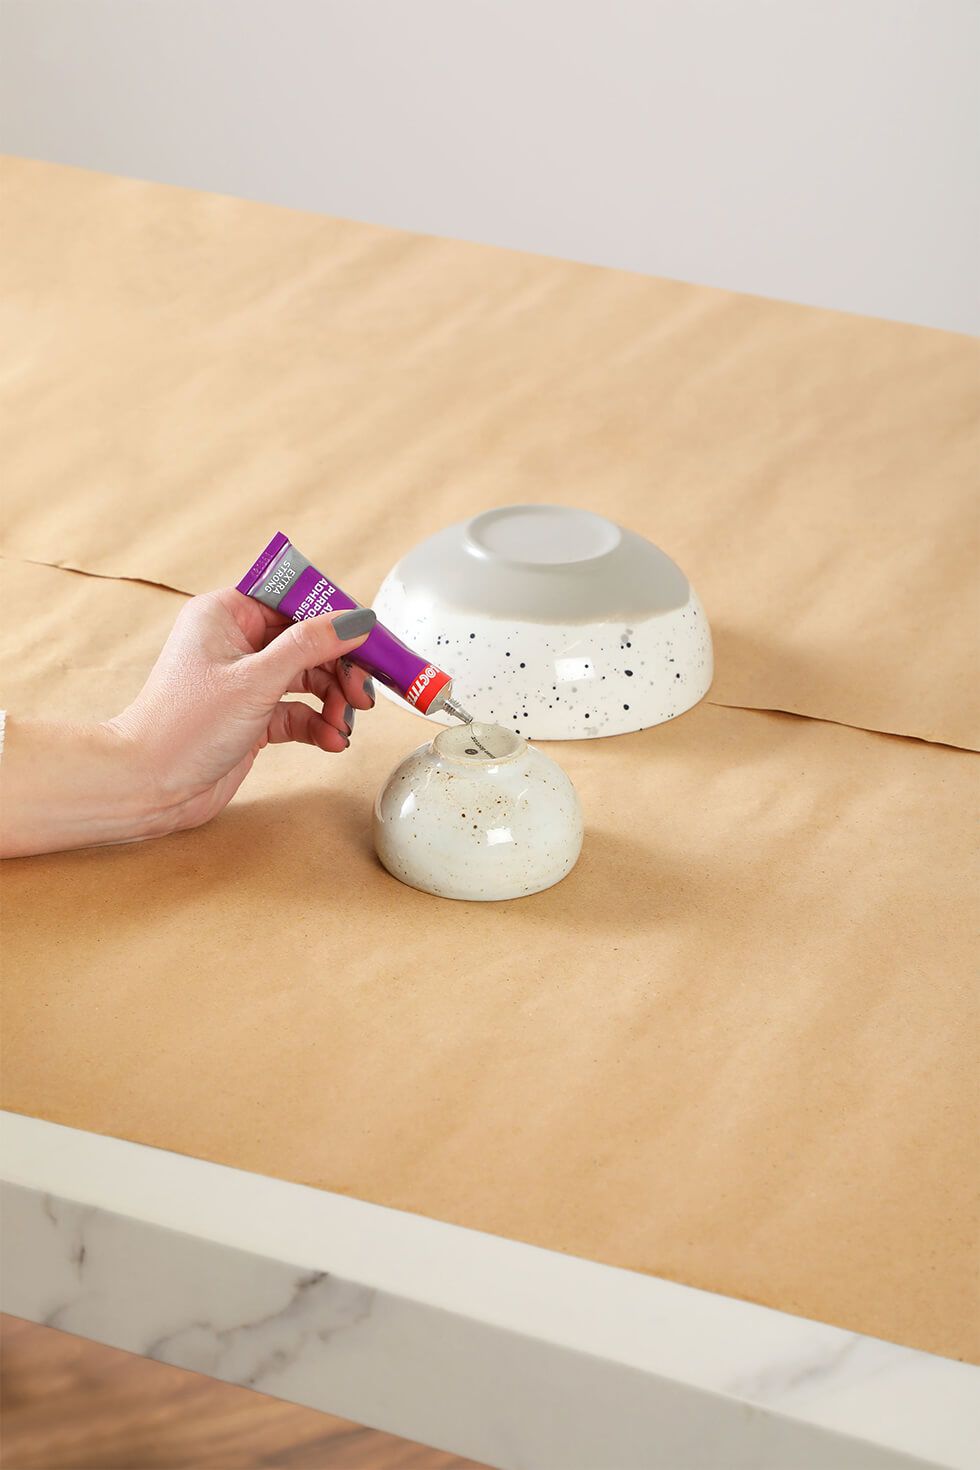 Create the base of the decorative bowl